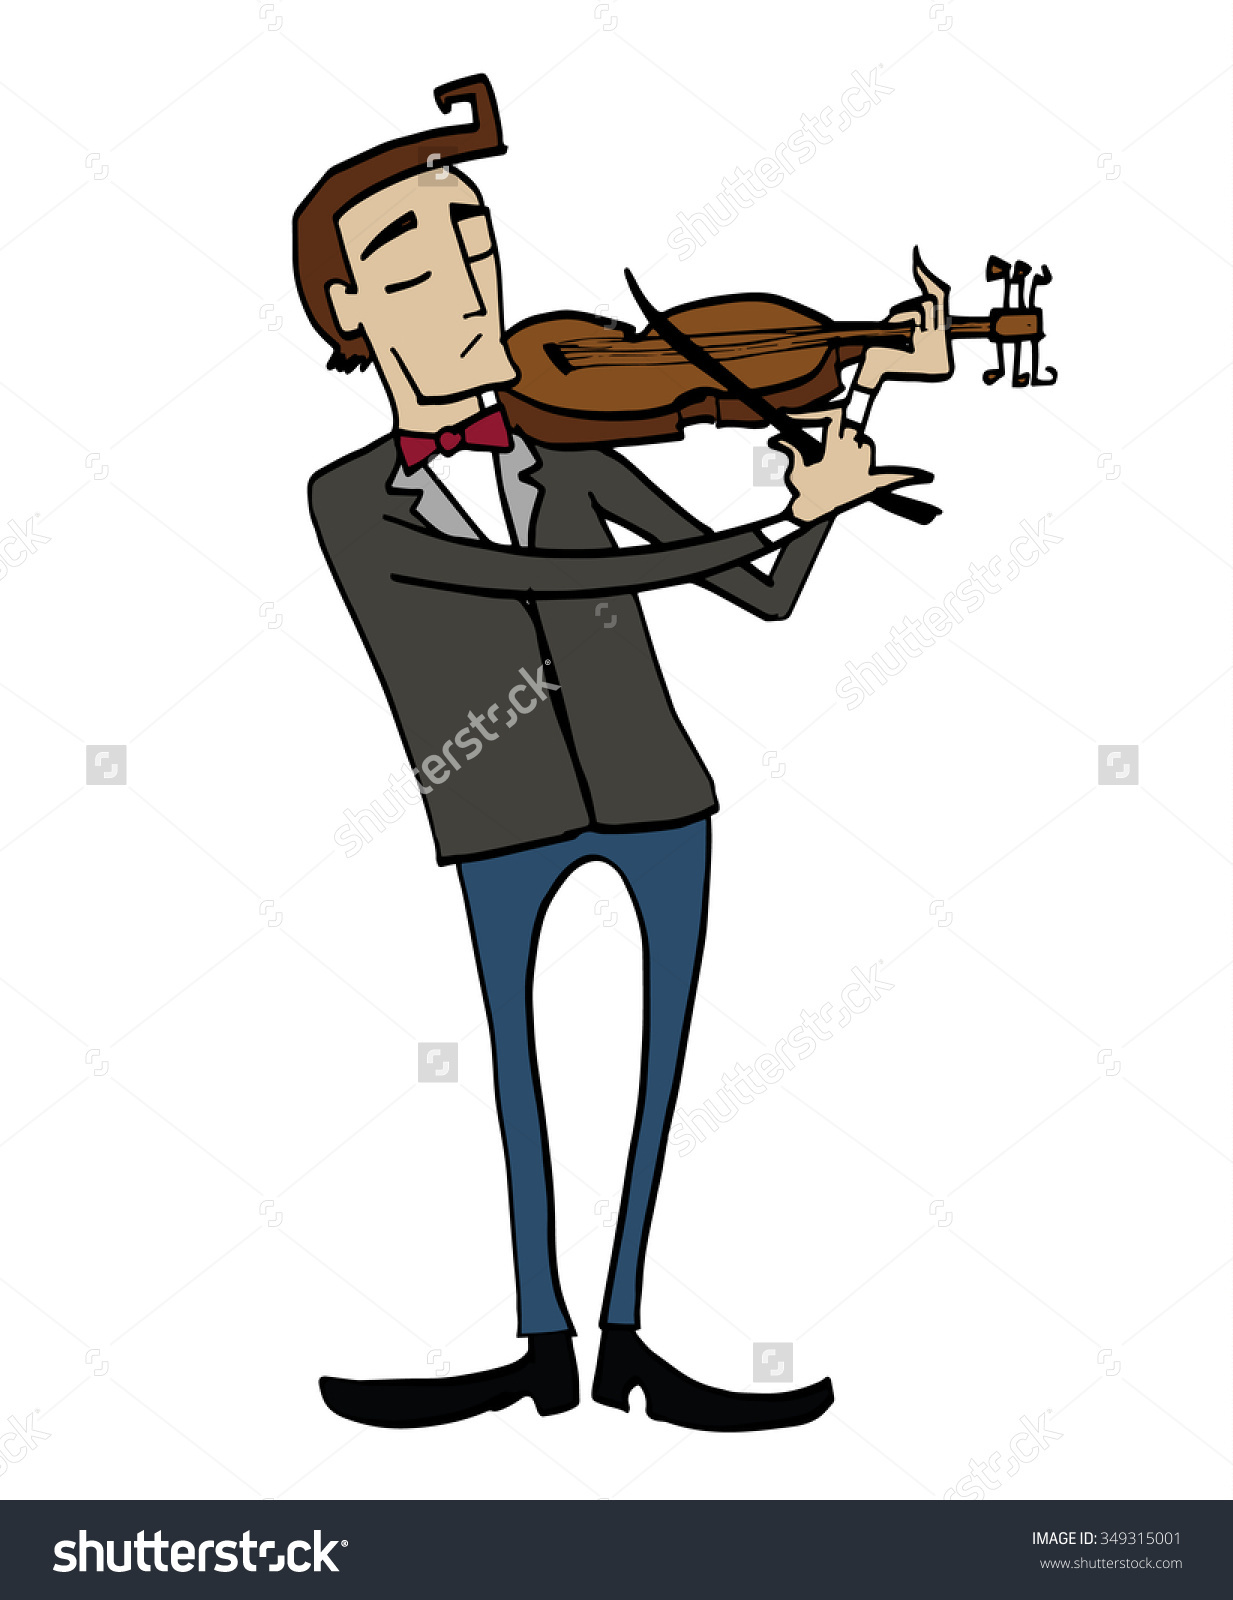 Violinist clipart #10, Download drawings